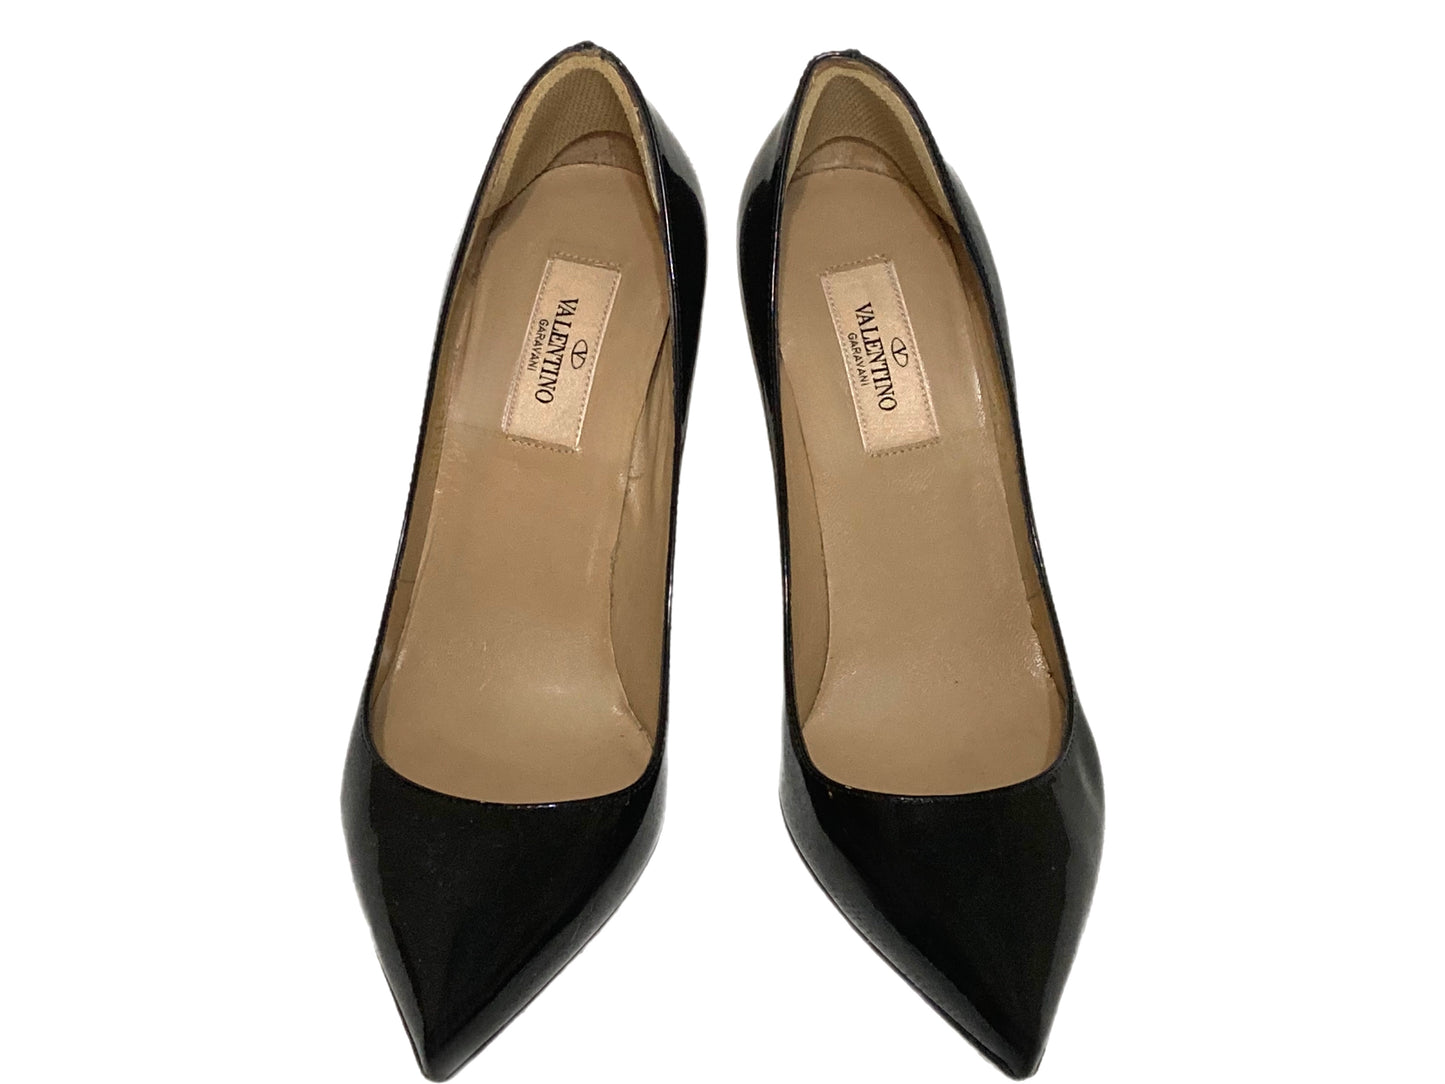 VALENTINO Patent Leather Pointed Toe Pumps Black Size 37